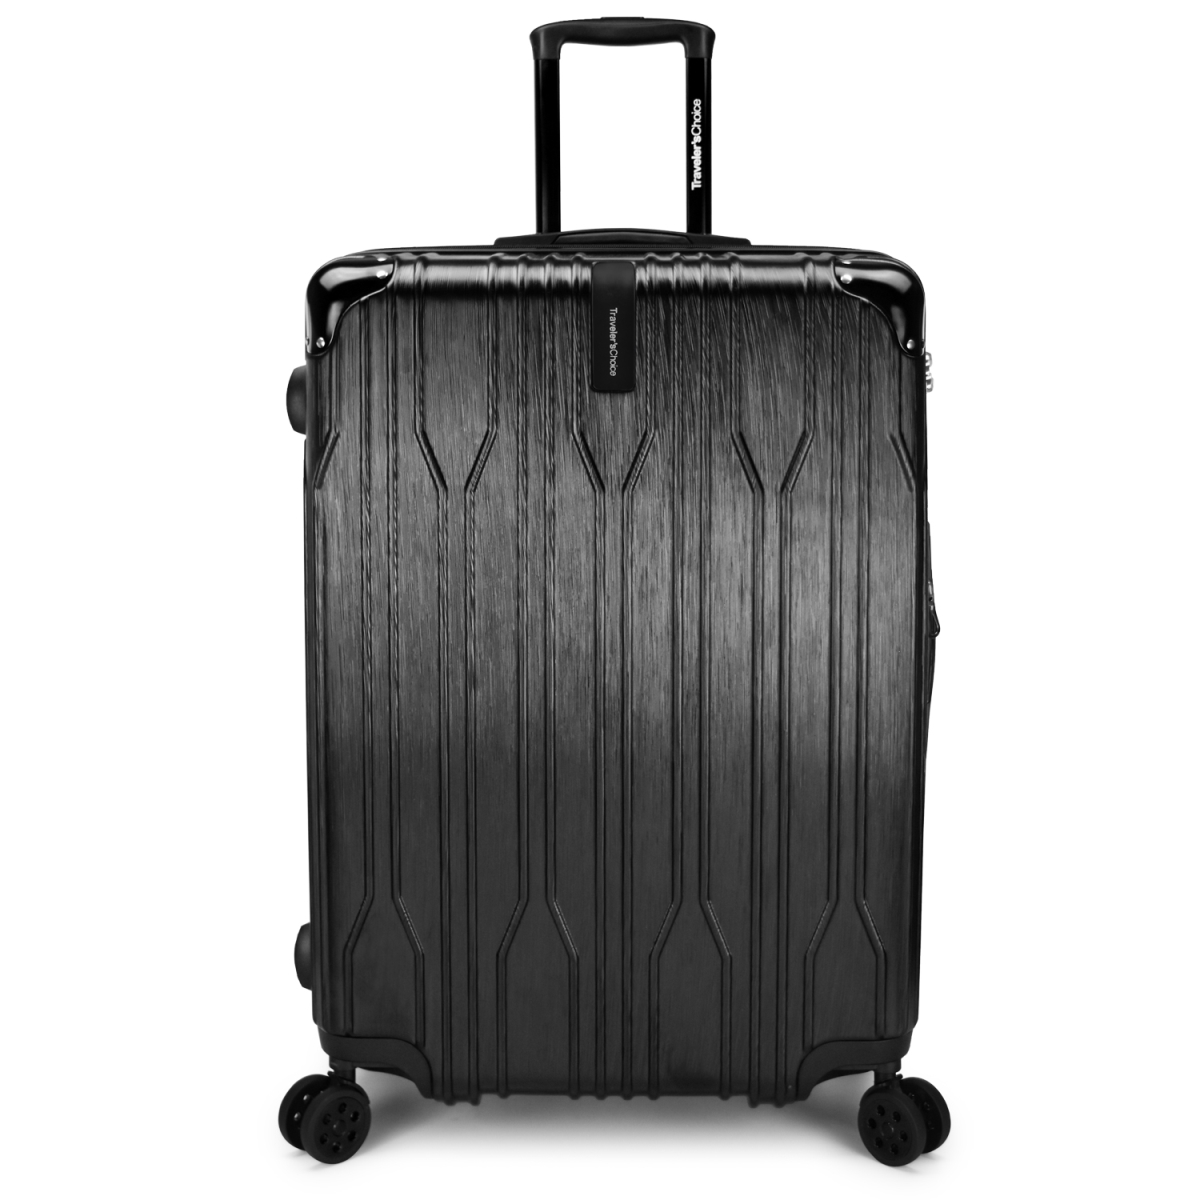 Travelers Choice Tc09035k28 Bell Weather Expandable 28 In. Spinner Luggage, Black